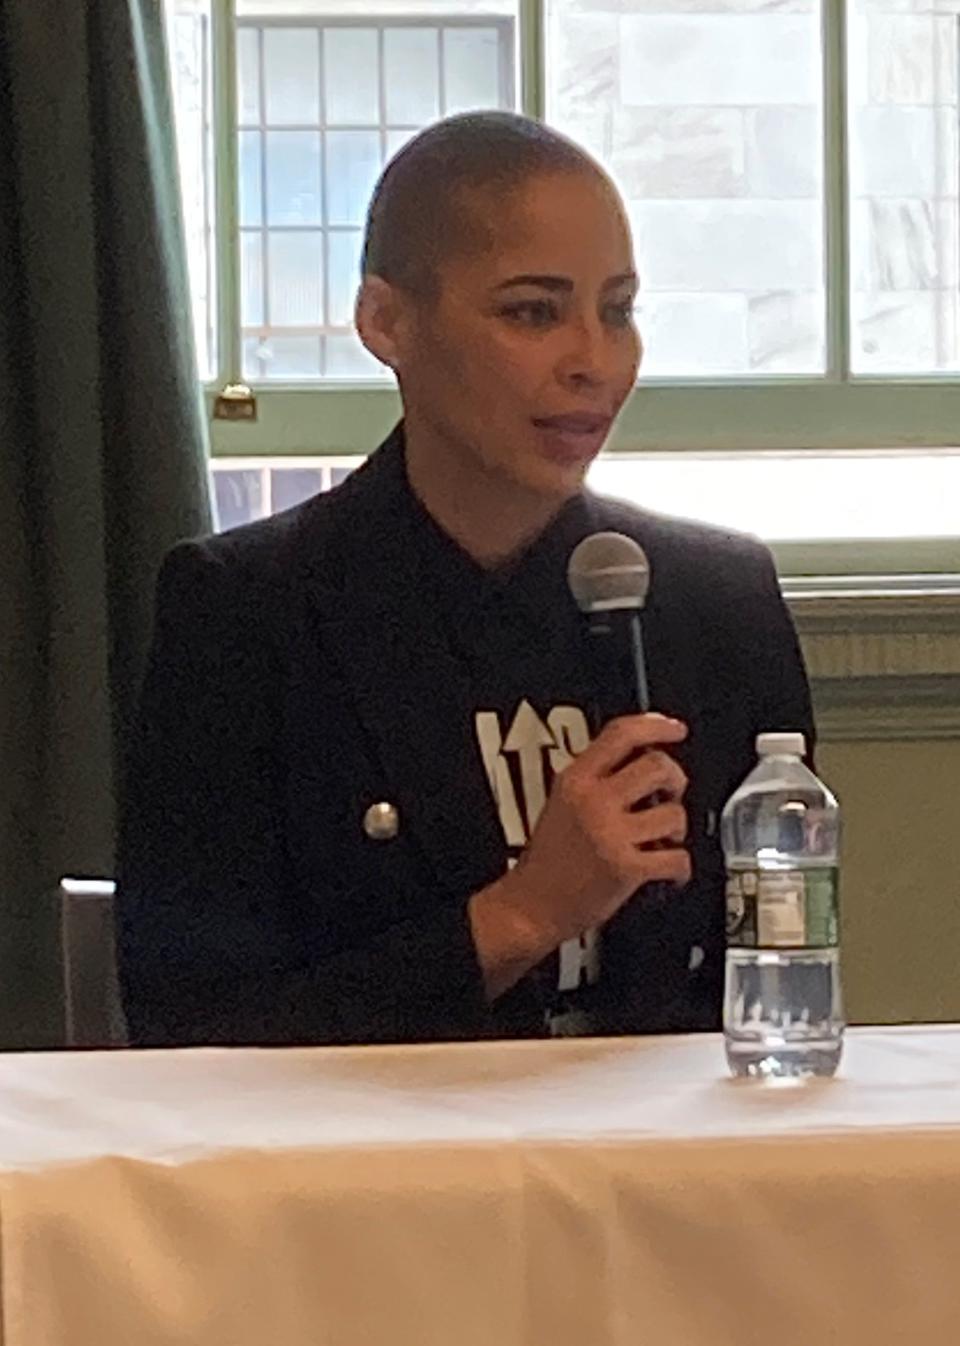 Allison Feaster, vice president of team operations and organization growth of the Boston Celtics, has a personal connection to the proposal to adjudicate young adults as juveniles through age 20, one that she mentioned at the legislative briefing on the bill held Wednesday.